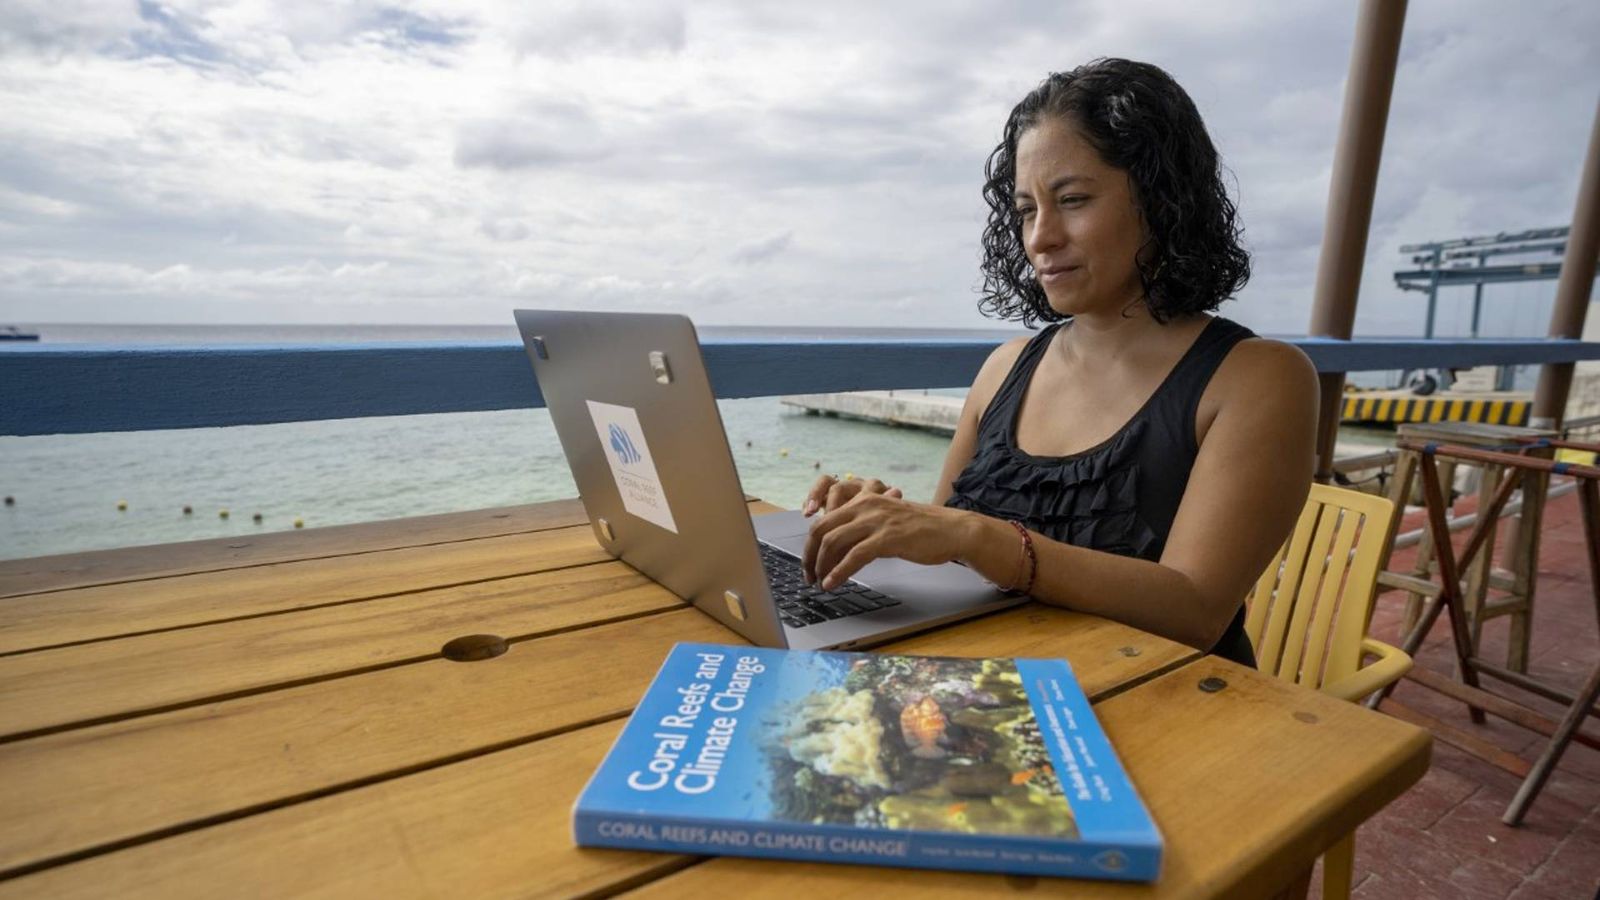 A woman working on a laptop with a coral reef textbook next to her.